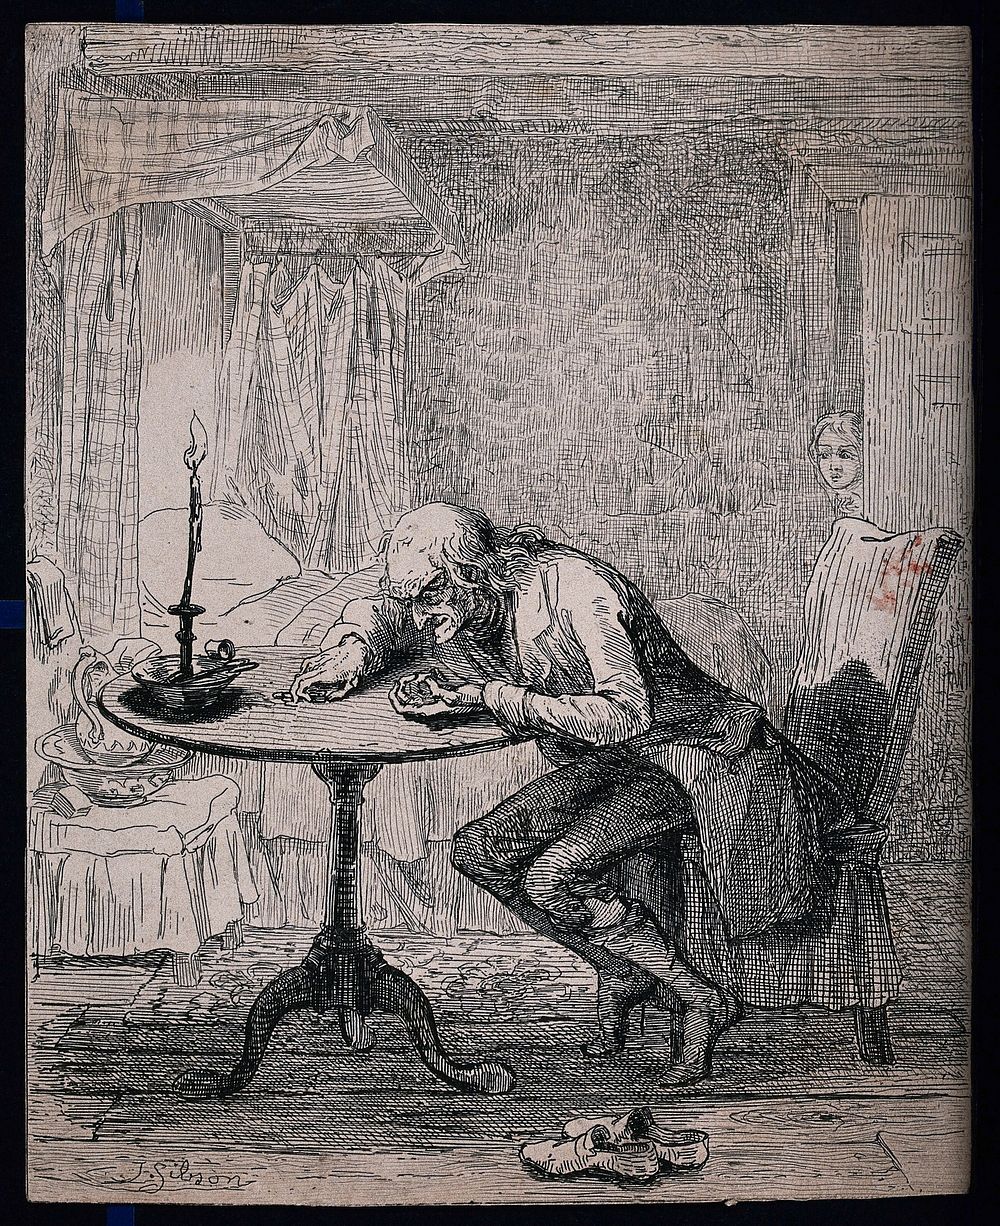 An old man leans over a table counting the money in his hand as a girl peeps through the door. Etching by T. Sibson.